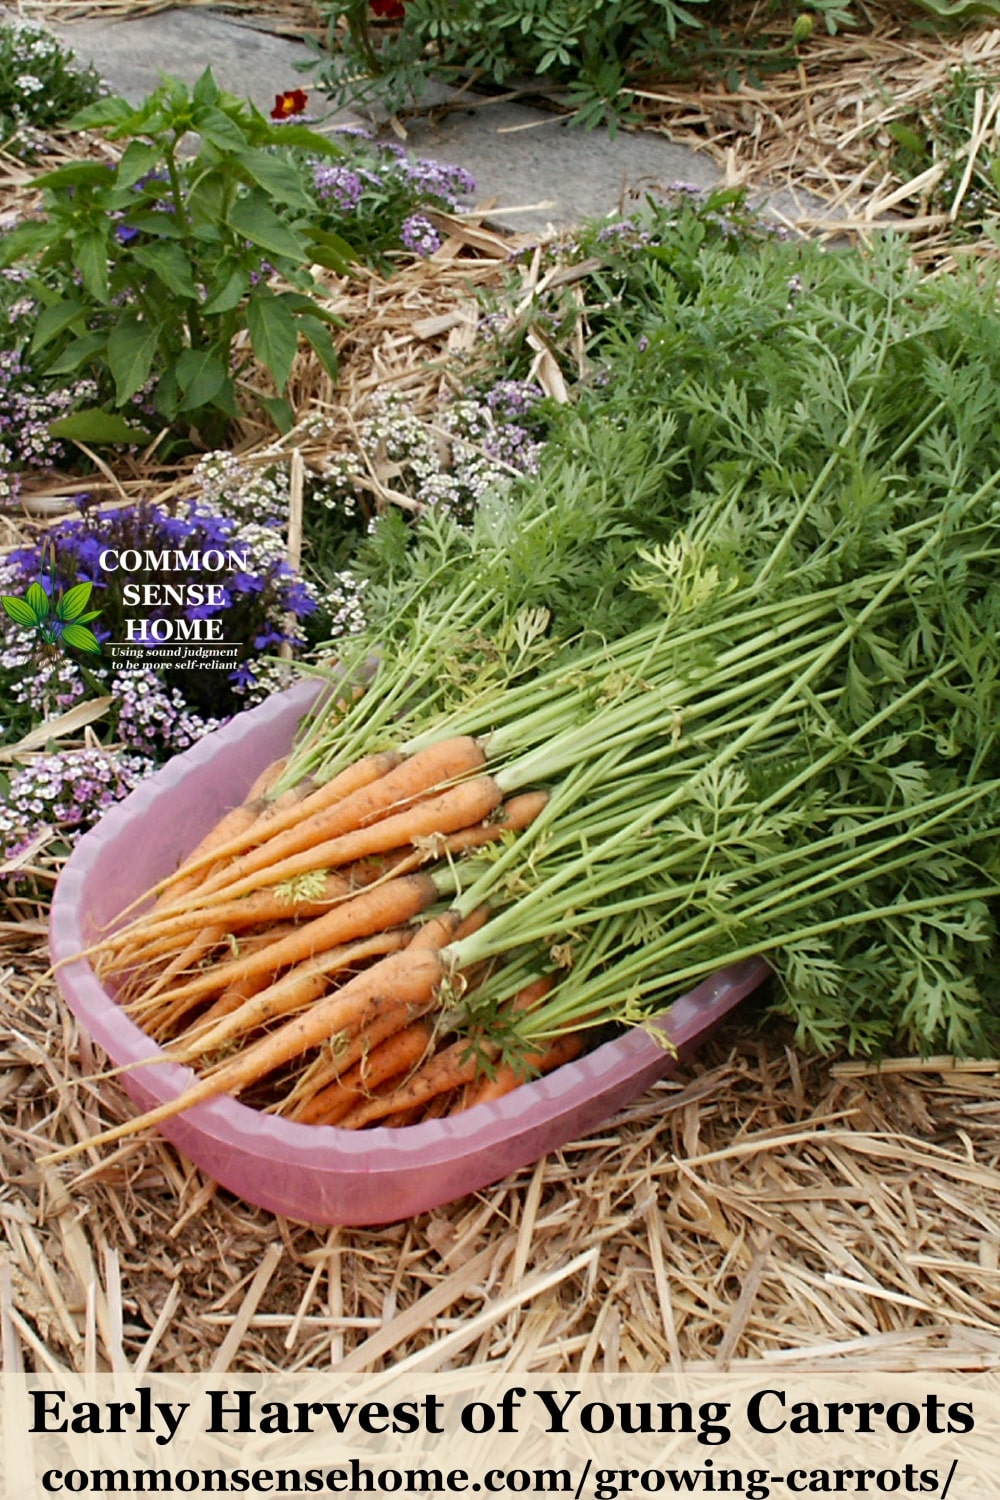 Early harvest of young carrots in a pink bin sitting on straw in the garden